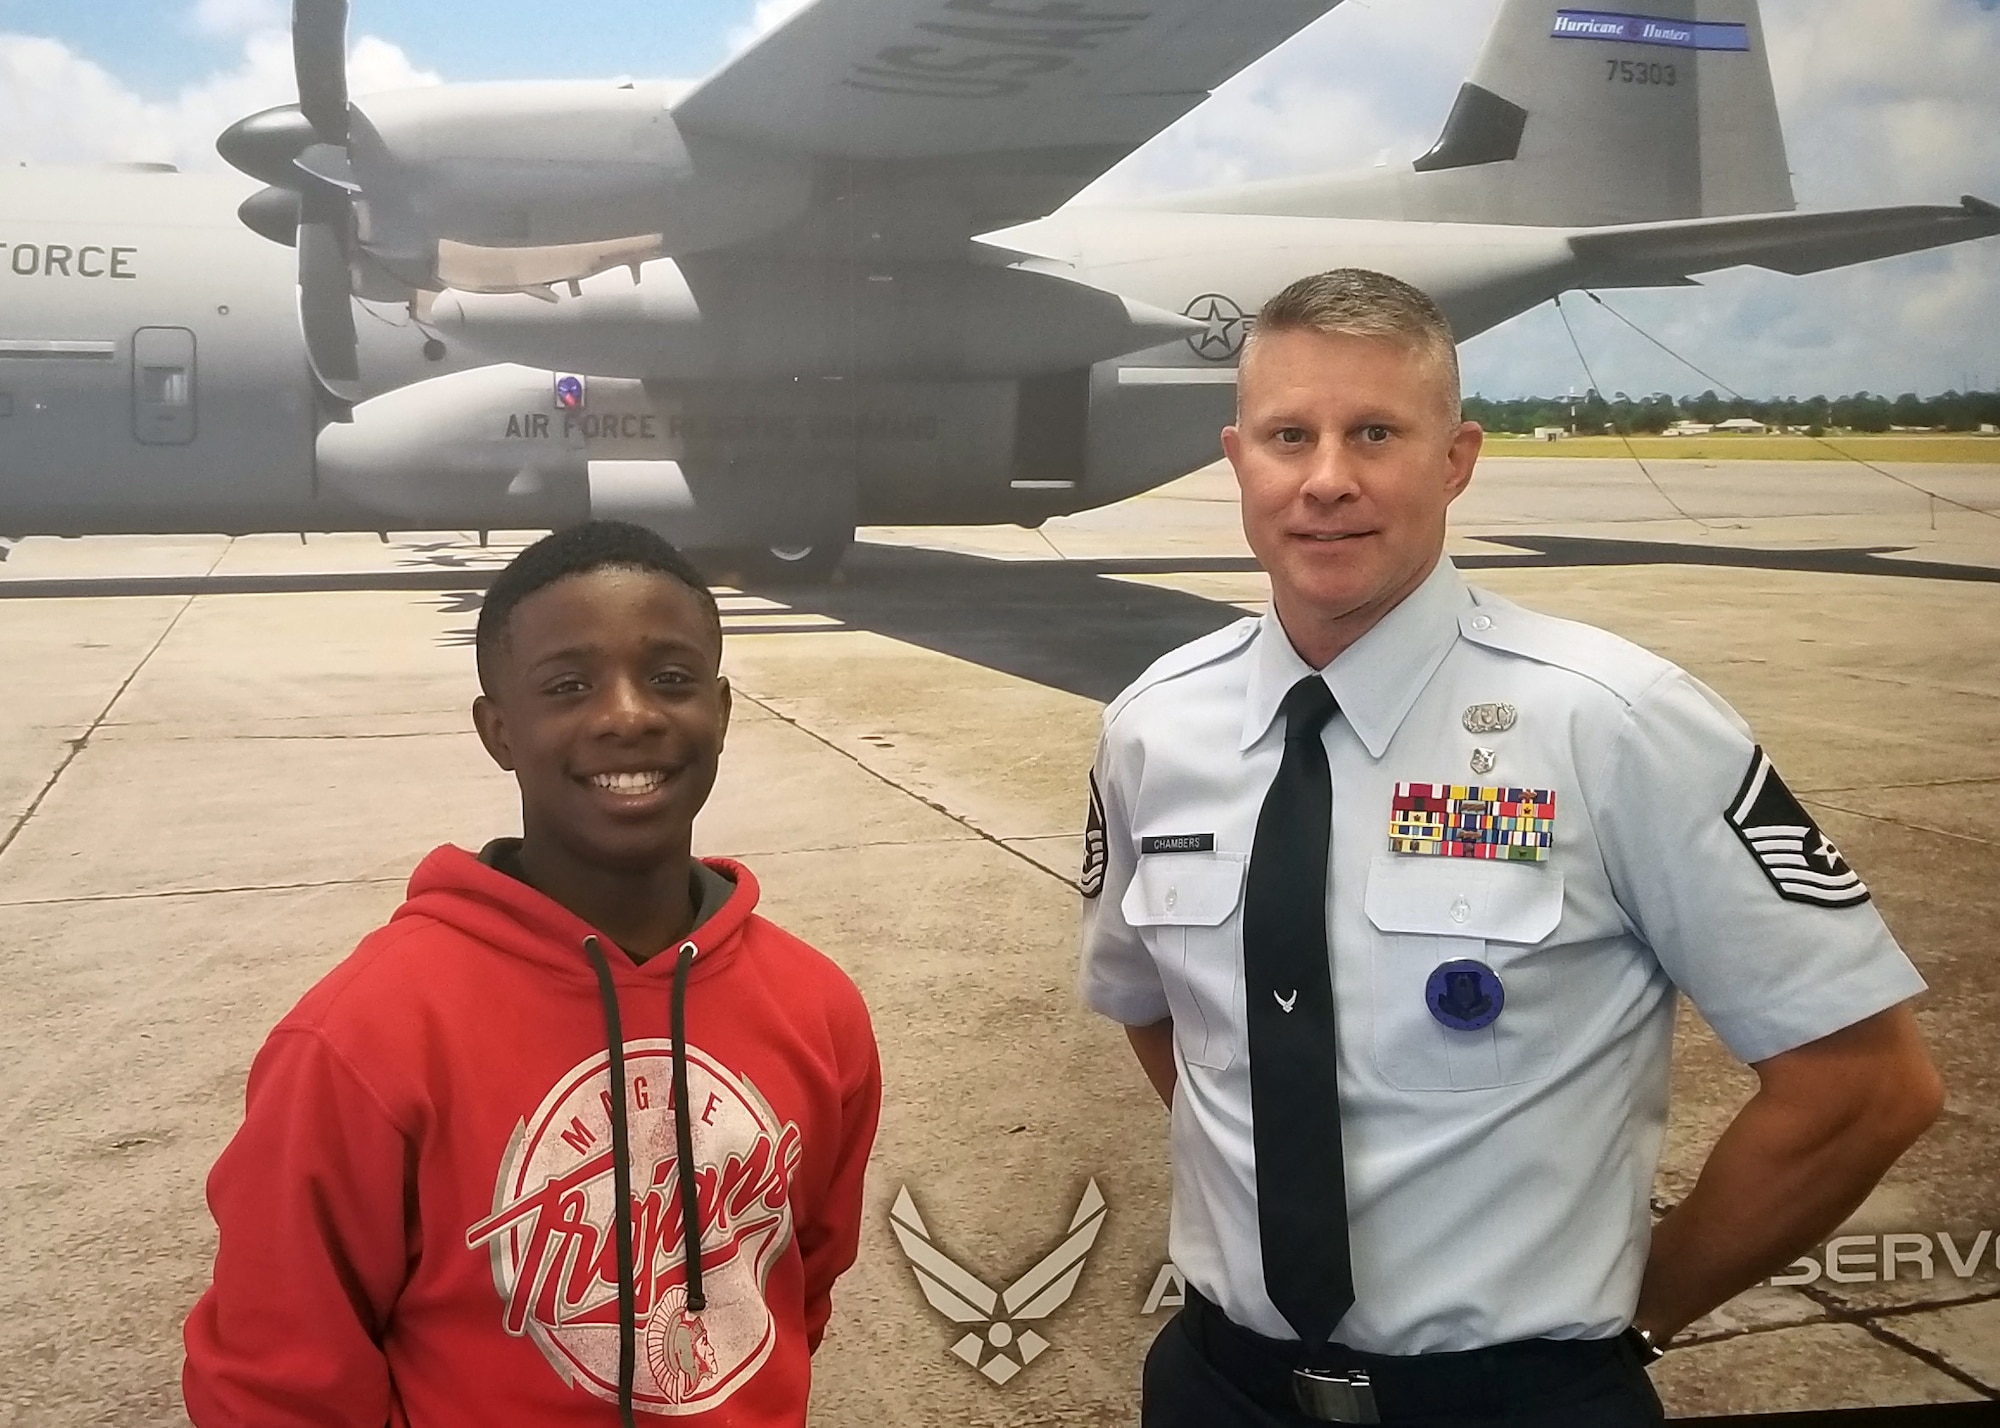 Master Sgt. Young D. Chambers is one of two new 403rd Wing recruiters at Keesler Air Force Base, Miss. He is replacing Tech. Sgt. David E. Rau, who retires in February 2019, in the Hattiesburg, Miss., office. He is standing beside one of his recruits, Jarvis Jackson who will be part of the 403rd Security Forces Squadon. (U.S. Air Force photo/Senior Master Sgt. Dominique Hogan)